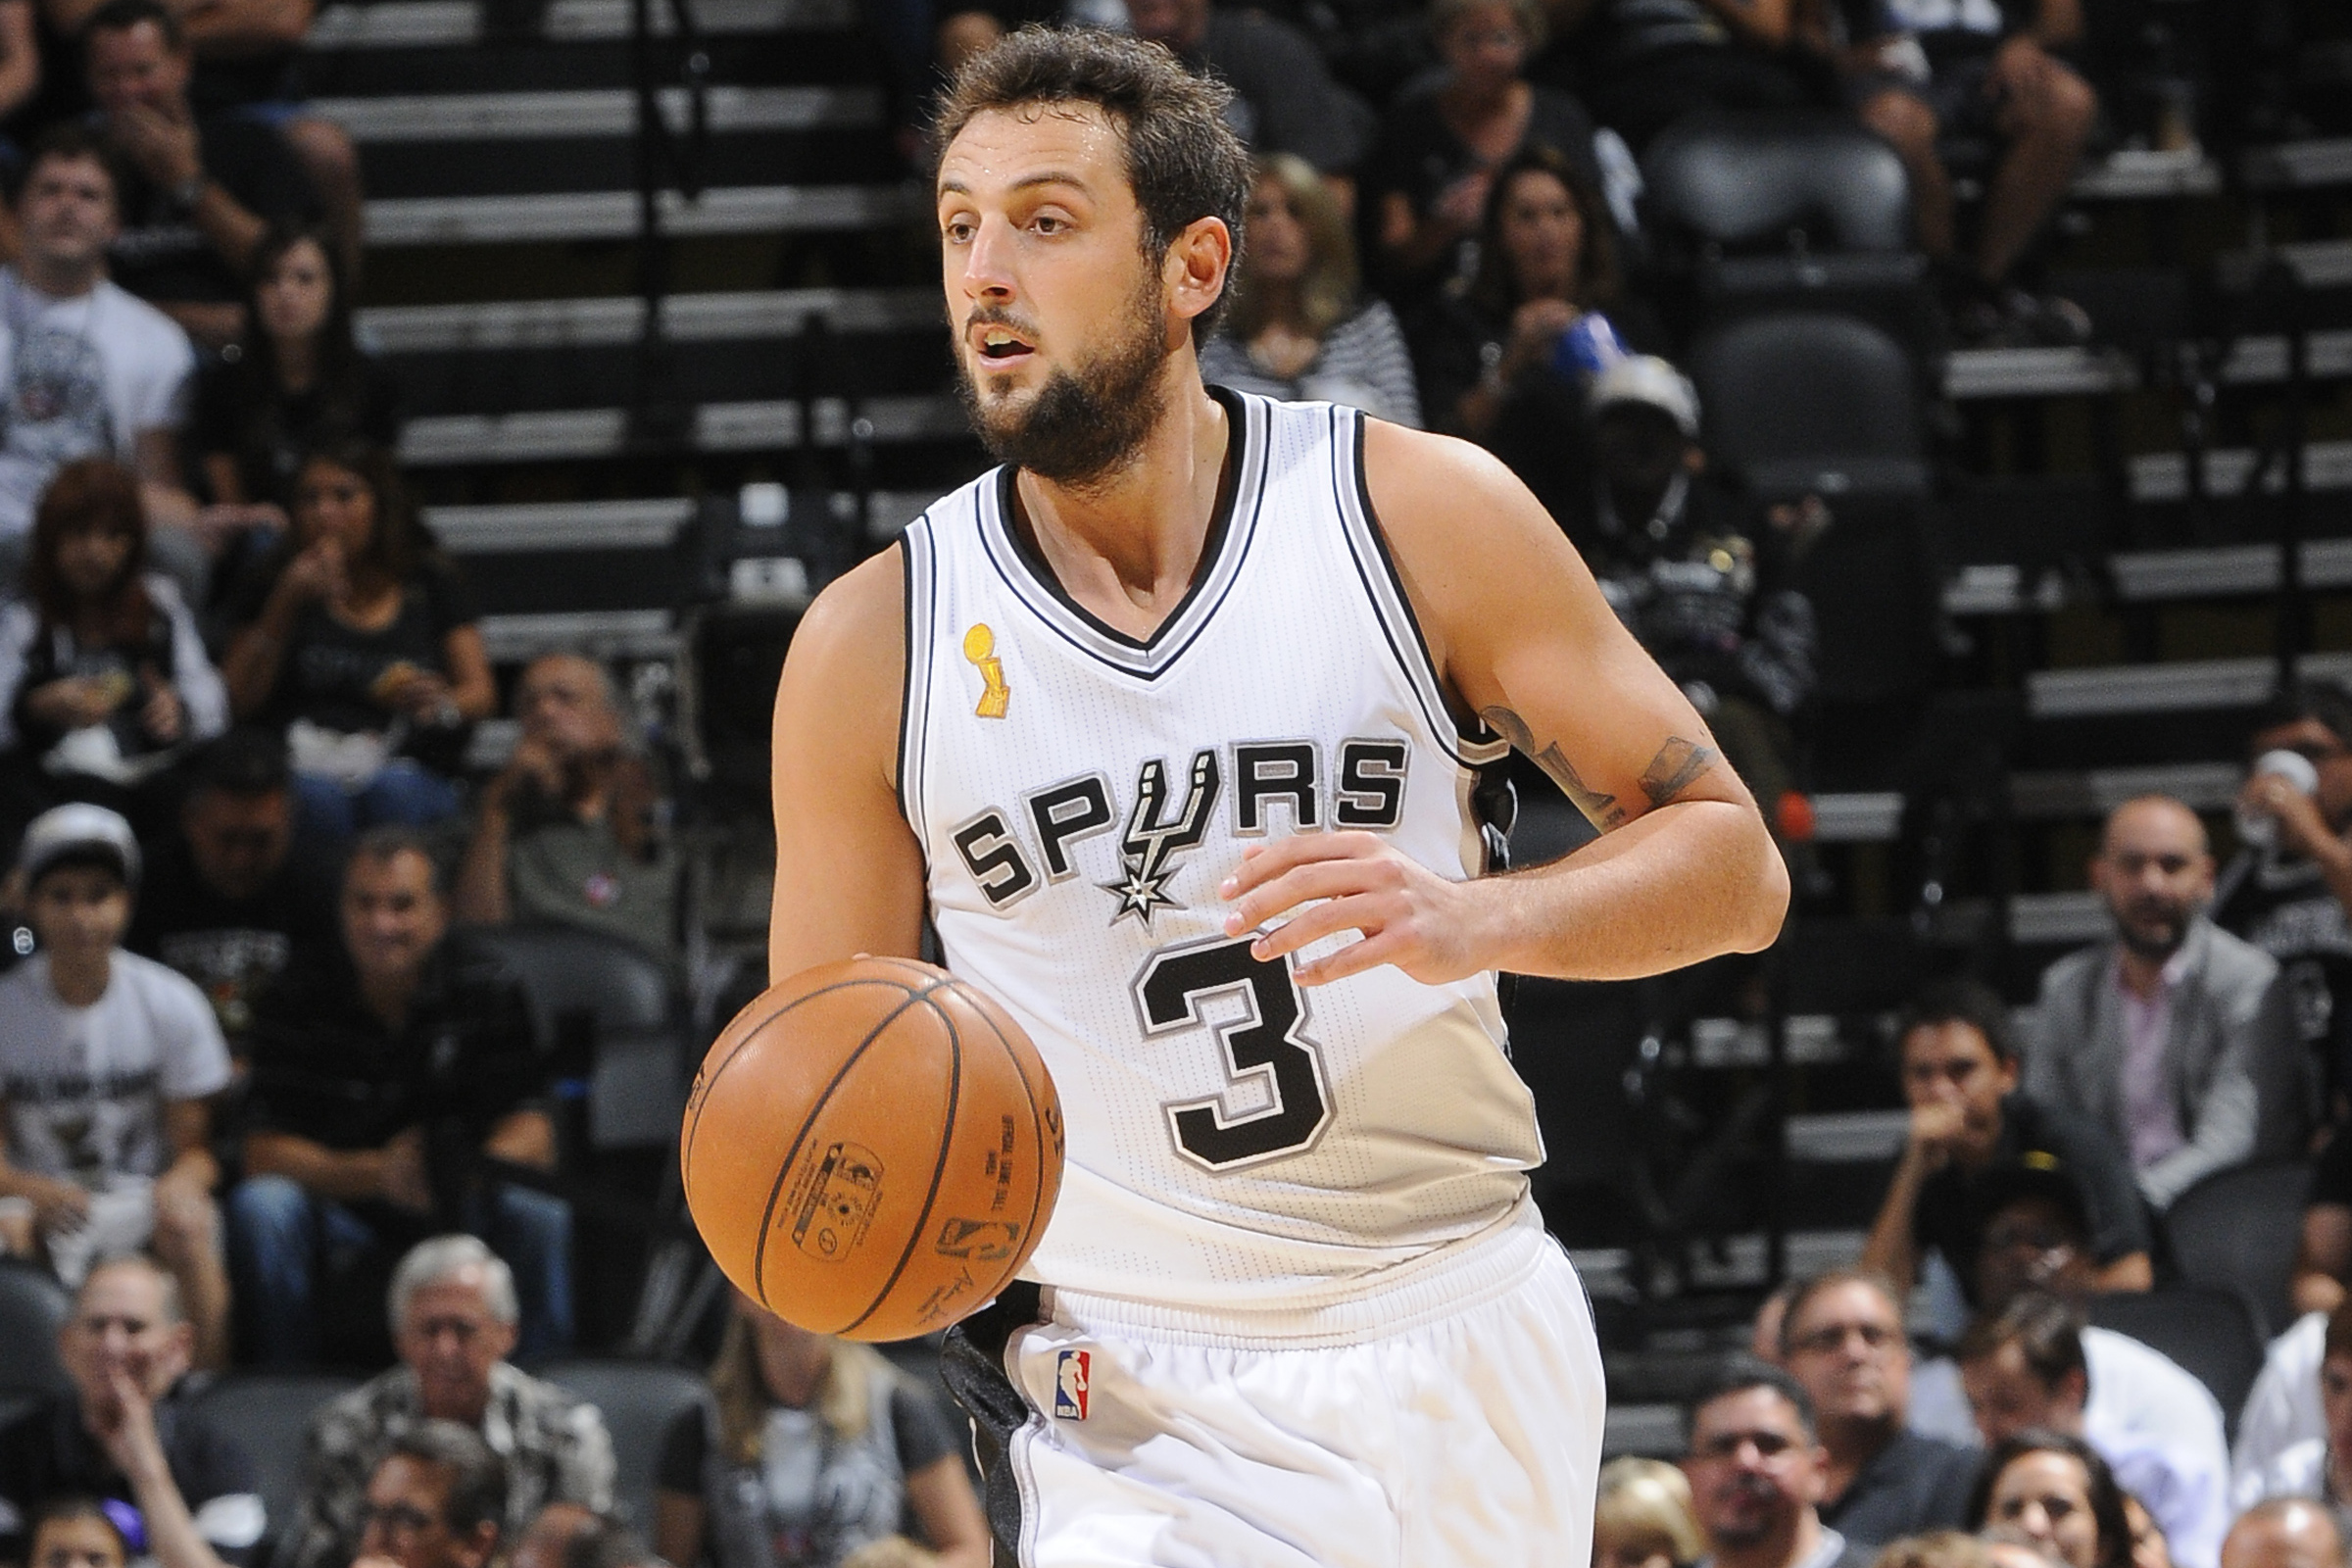 Marco Belinelli jokes that the Spurs never die